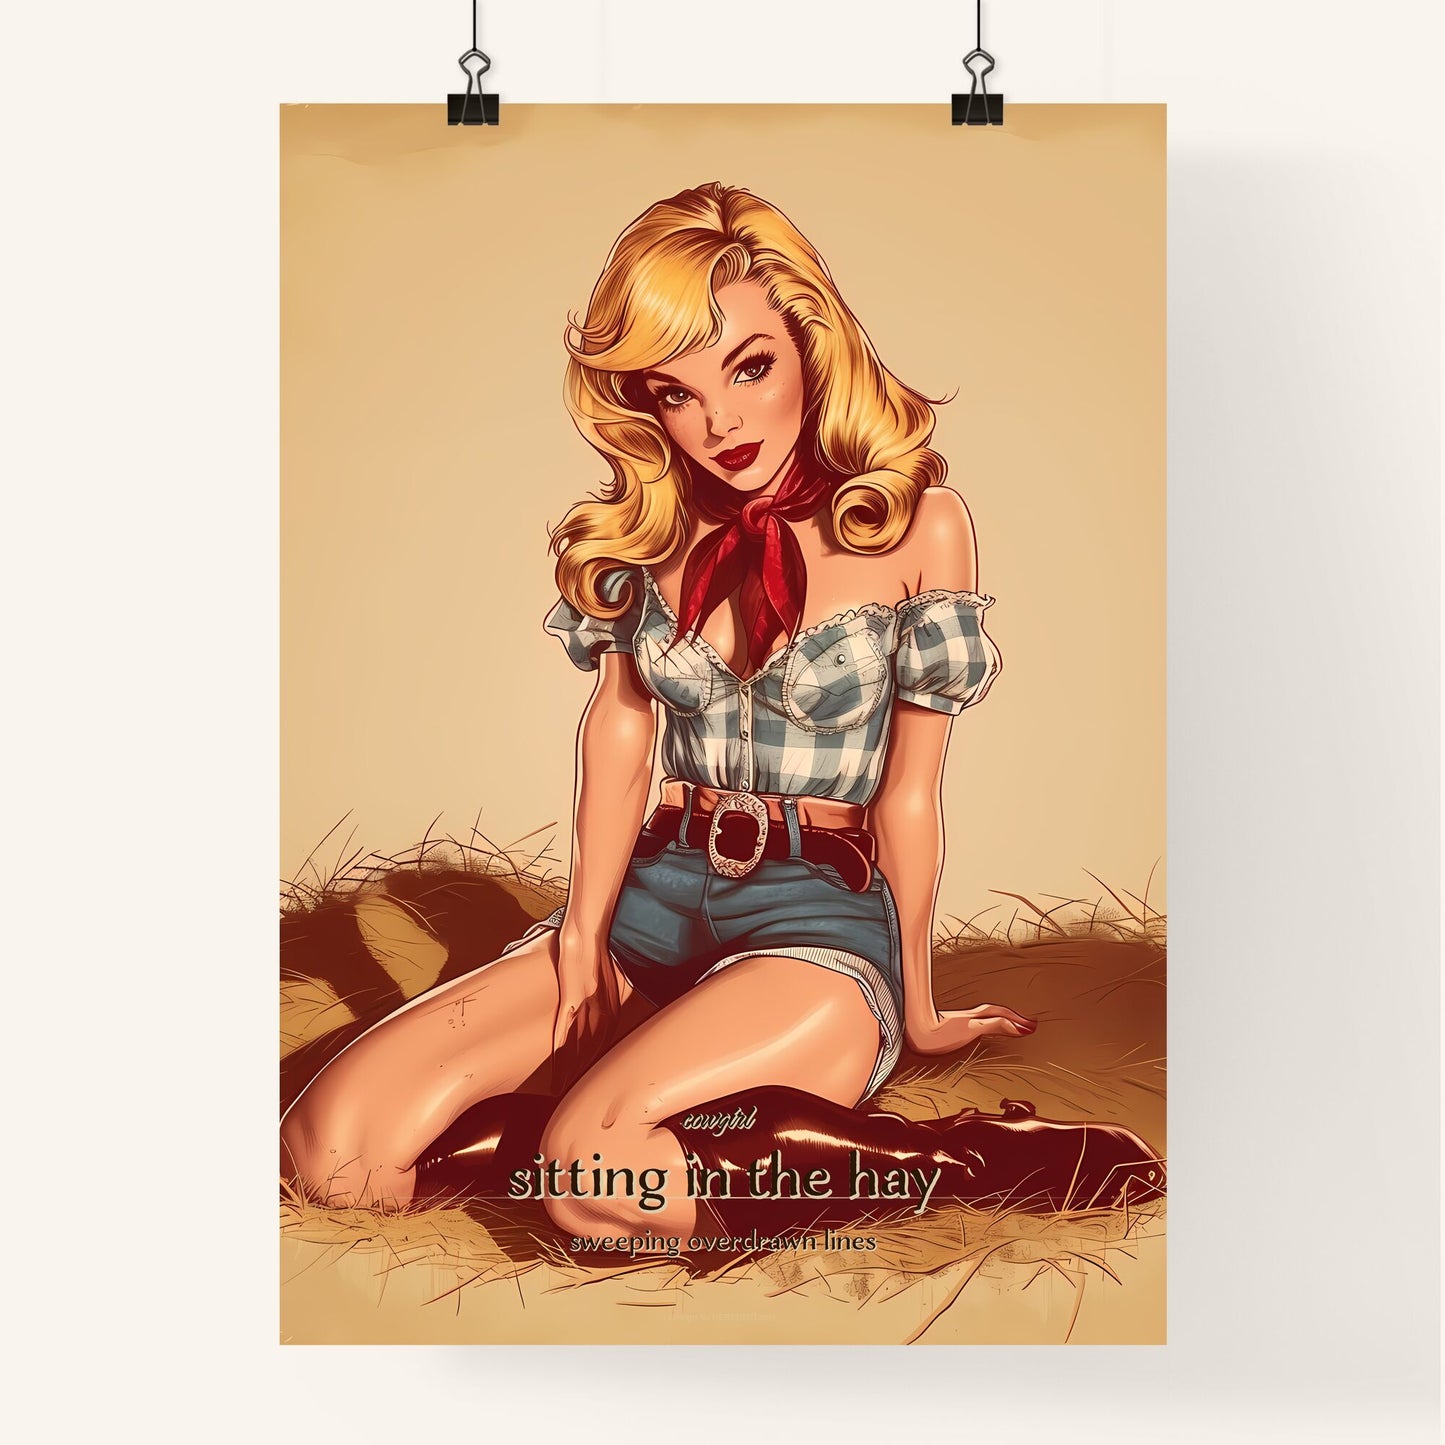 cowgirl, sitting in the hay, sweeping overdrawn lines, A Poster of a woman sitting on hay Default Title